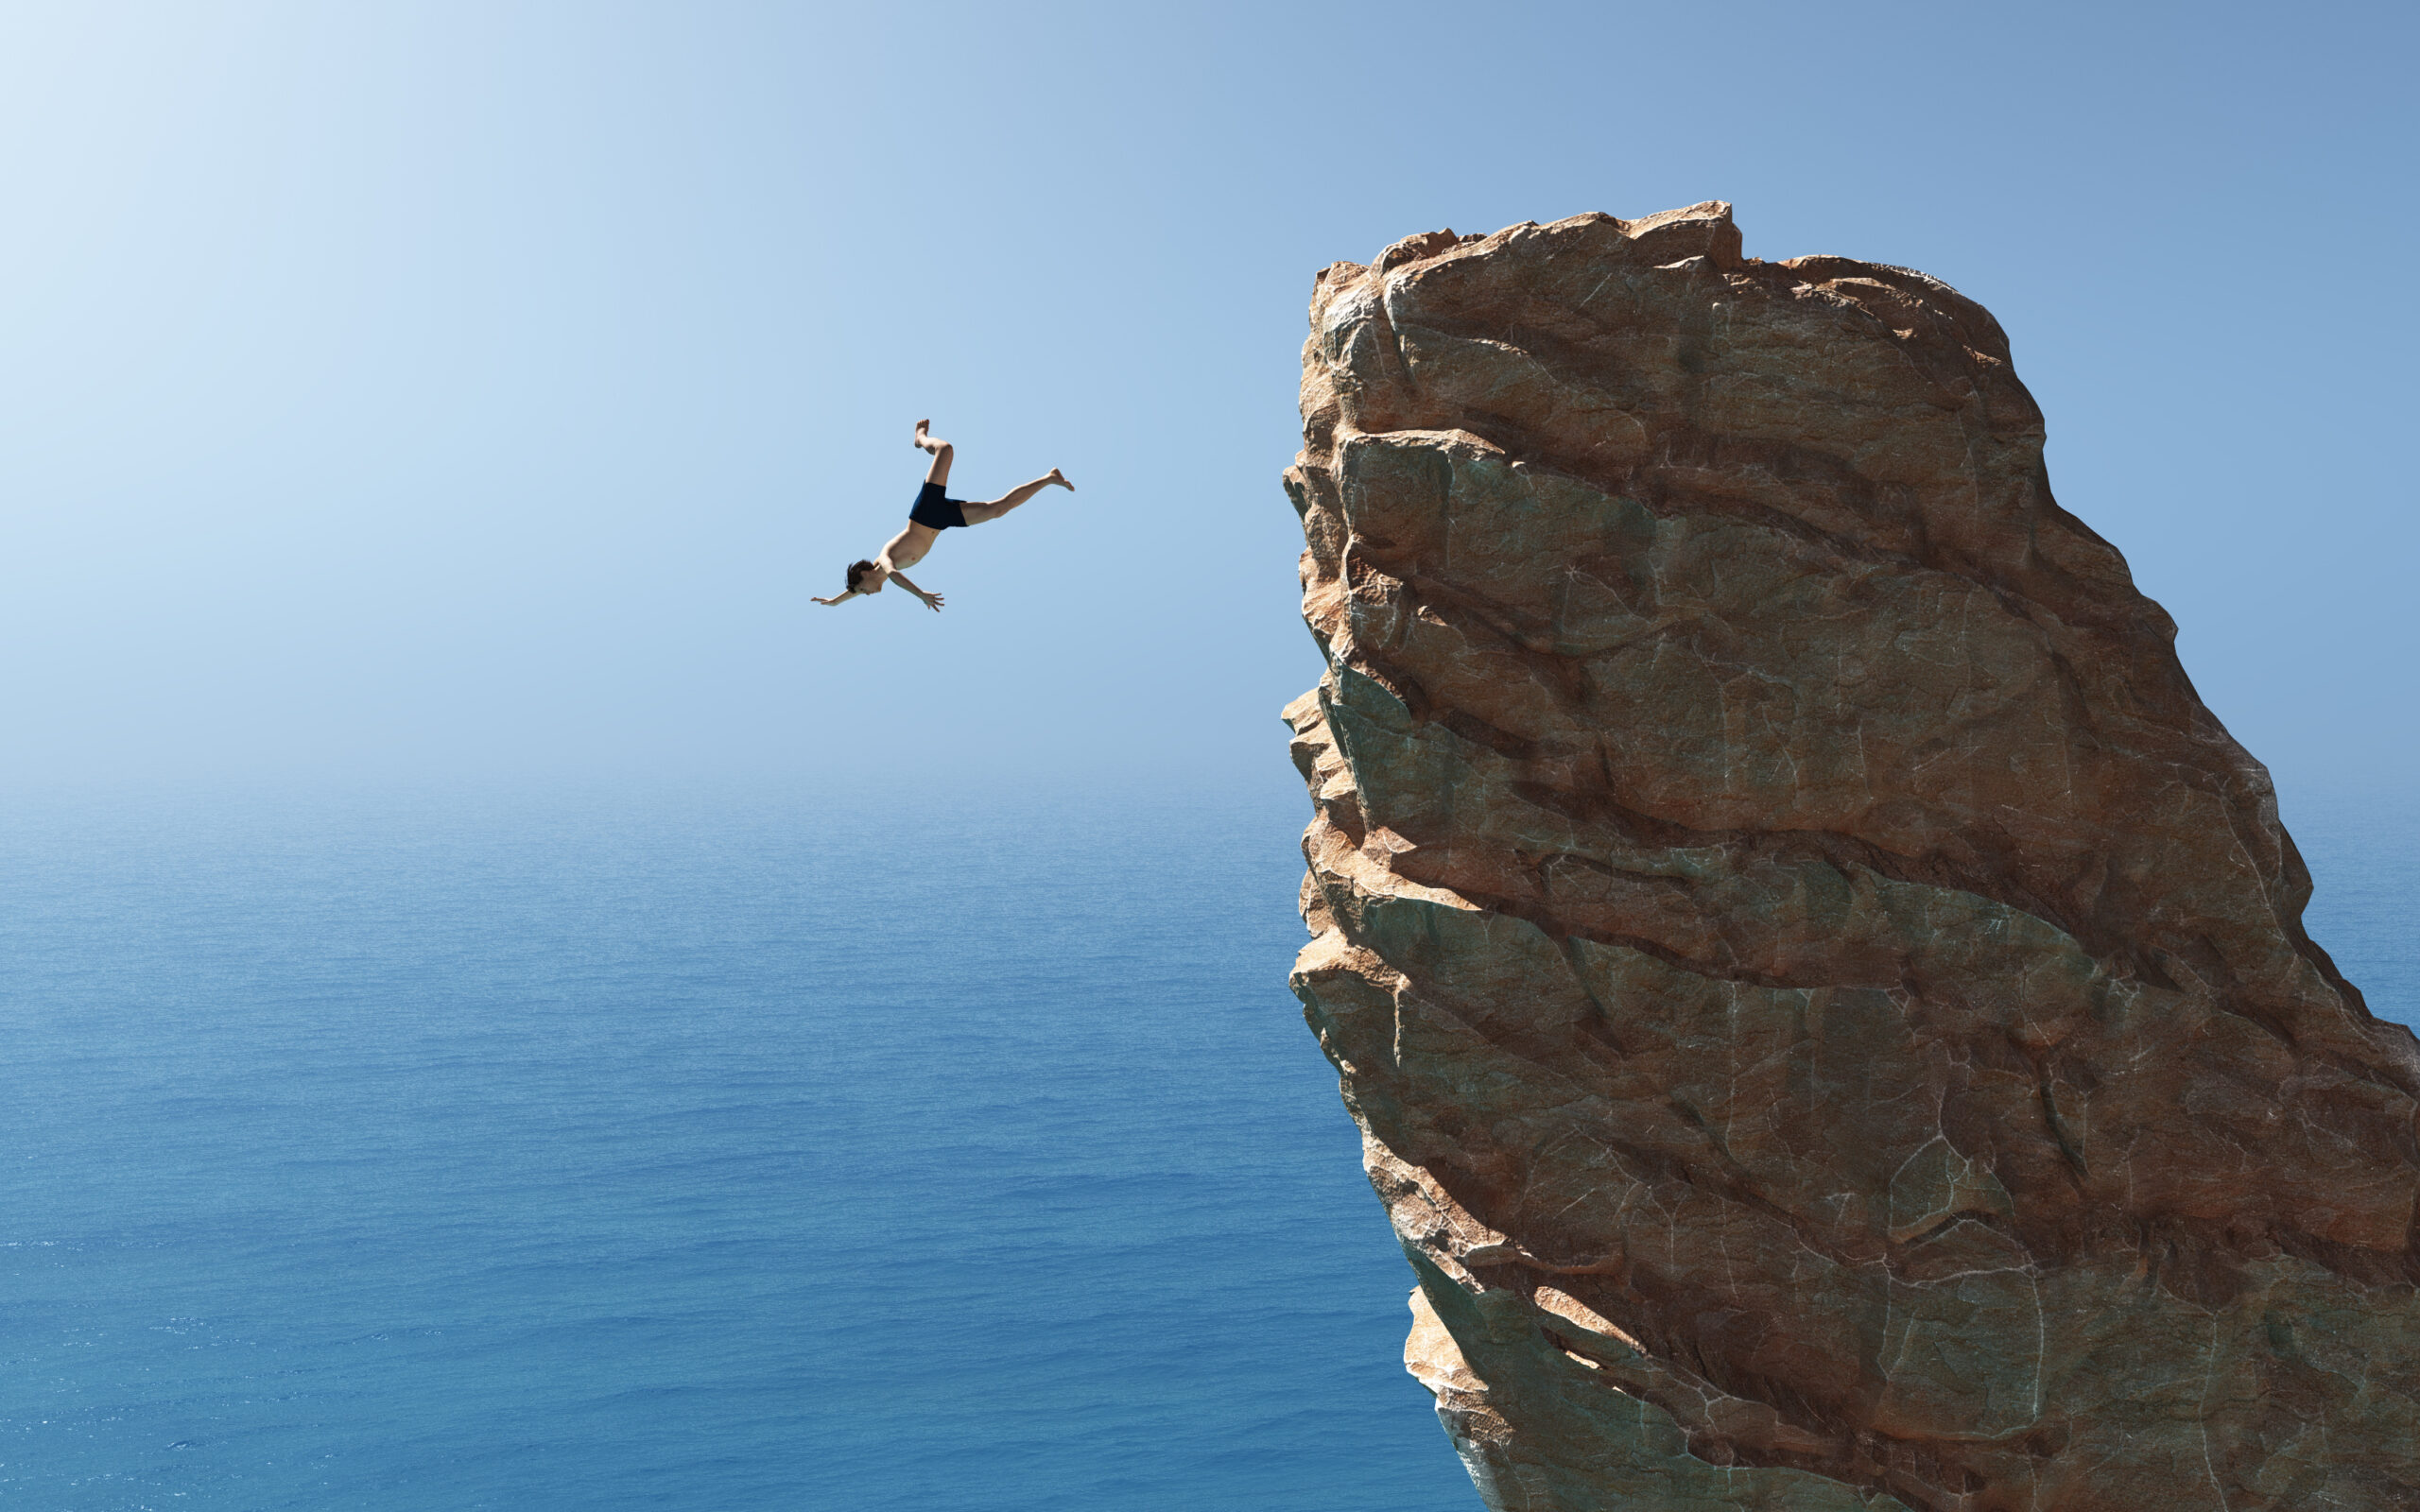 HR Tech Funding Falls Off A Cliff To A Three Low